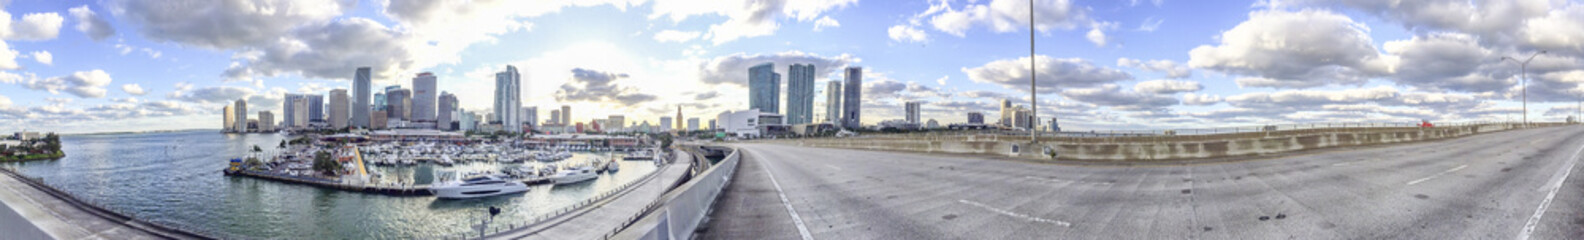 Panoramic view of Downtown Miami from Port Boulevard